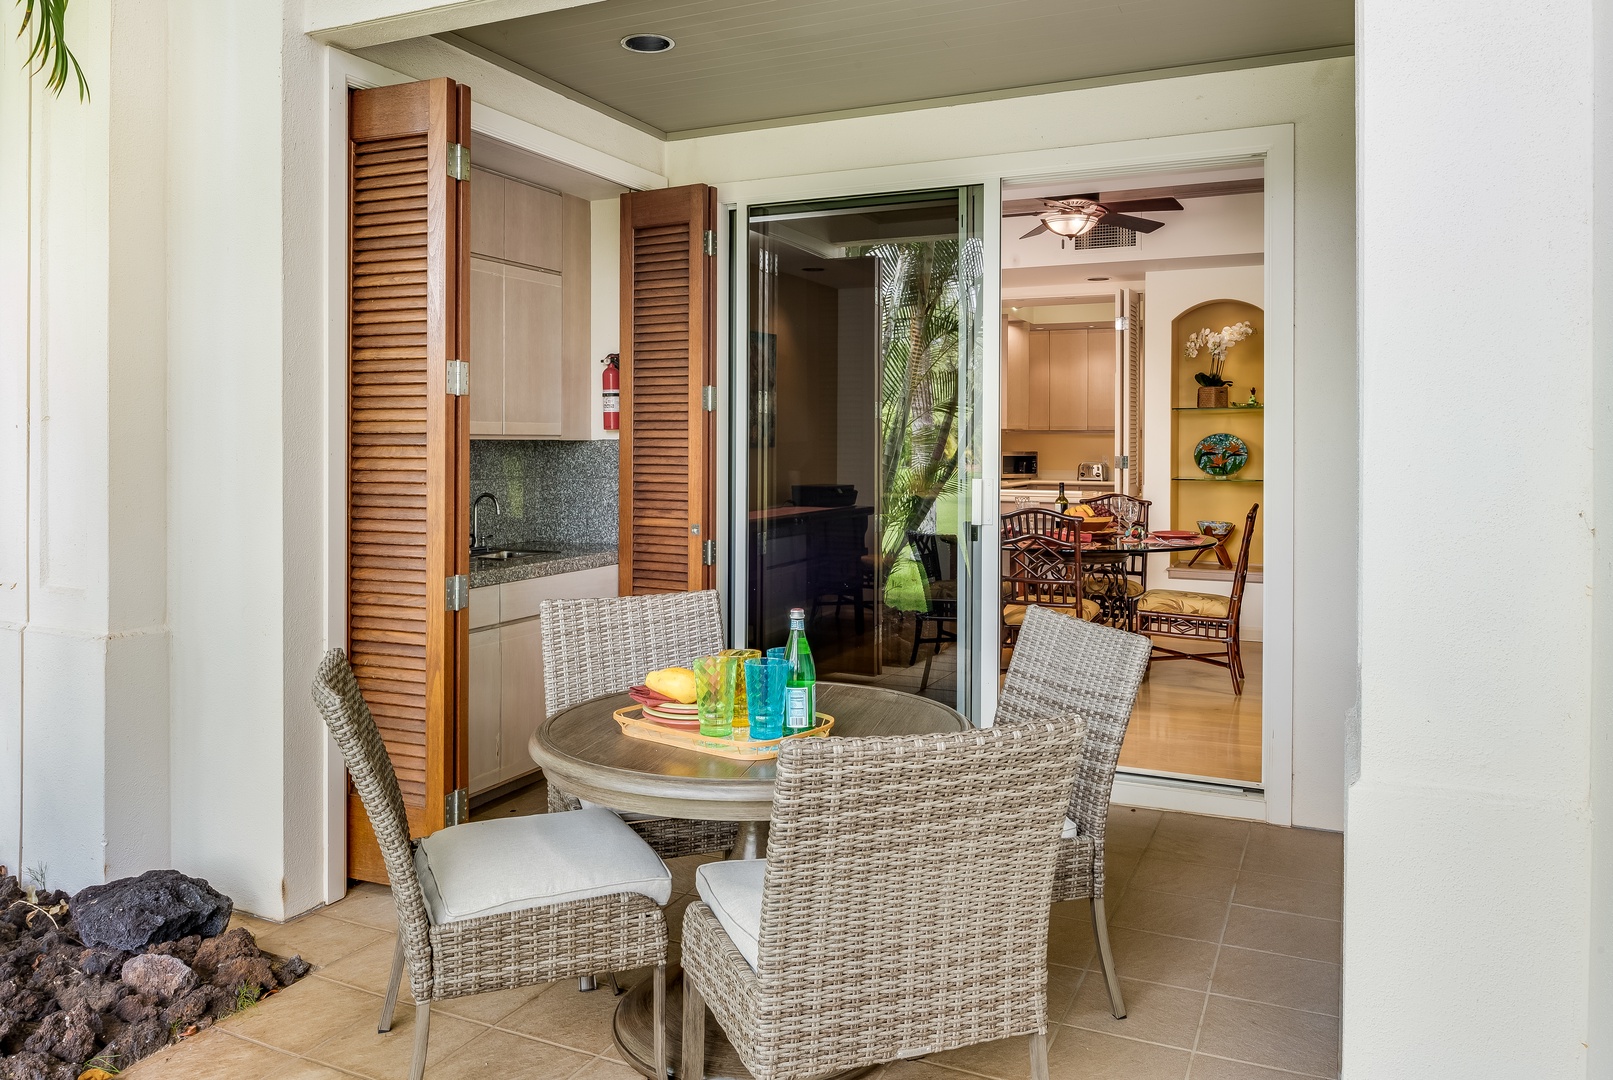 Kamuela Vacation Rentals, The Islands D3 - Your Private Gas Grilling Area w/ Wet Bar